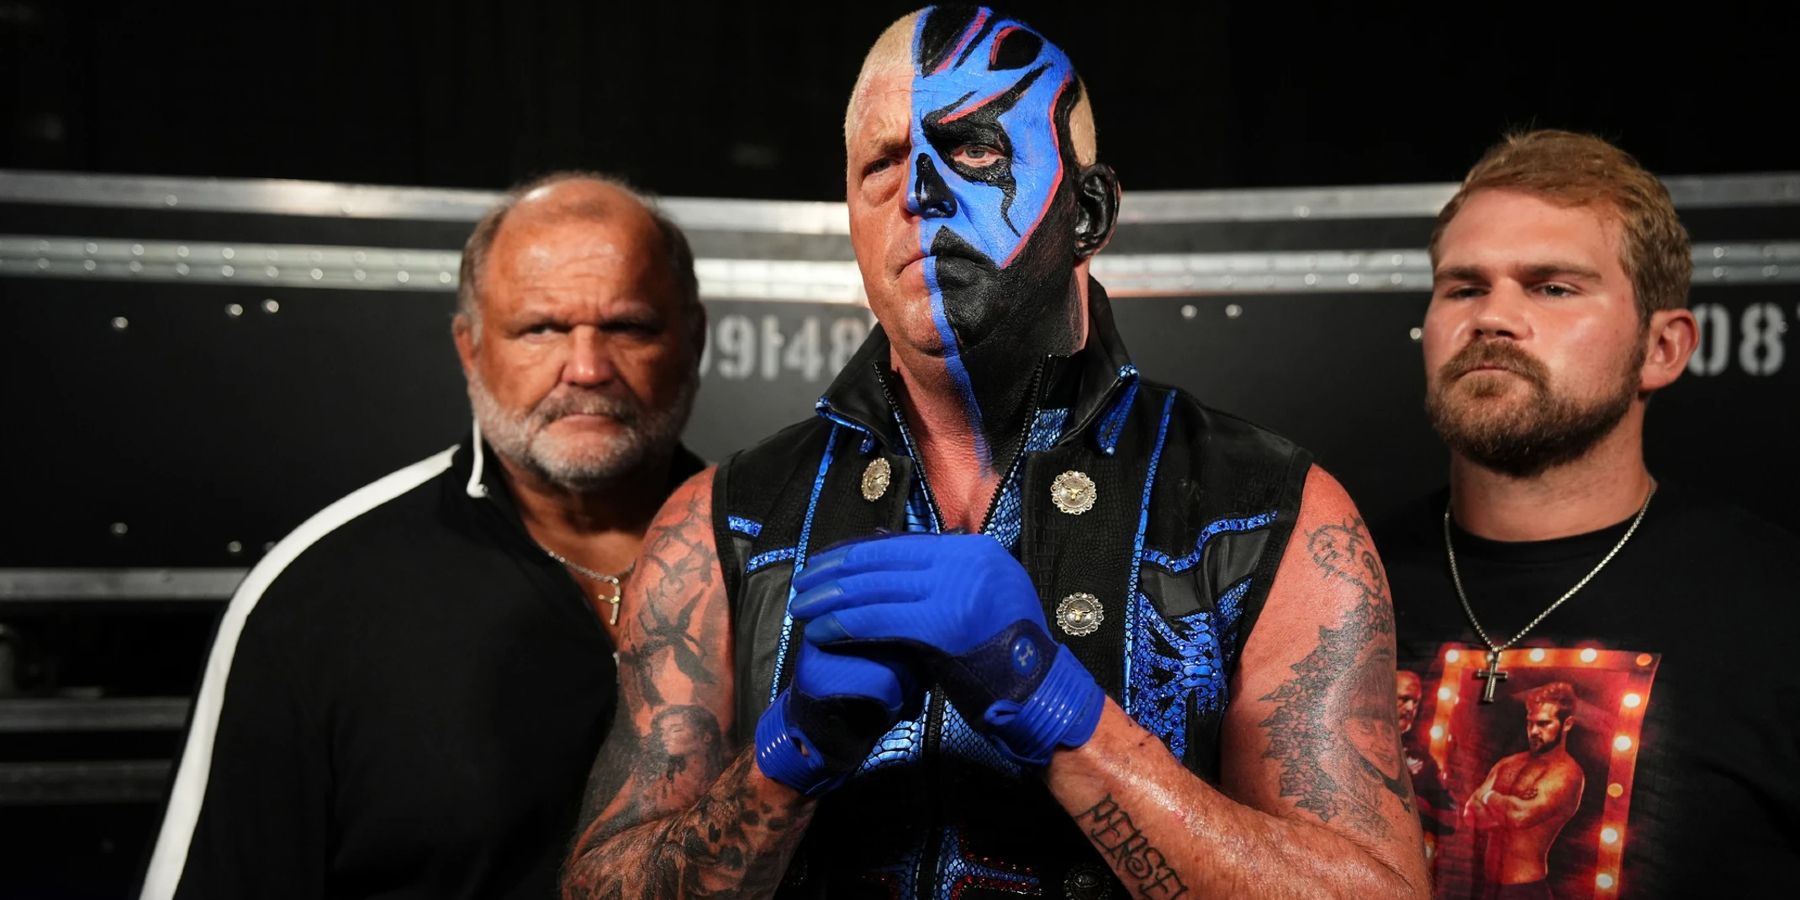 Dustin Rhodes Says He's Proud To Shape The Next Stars In AEW